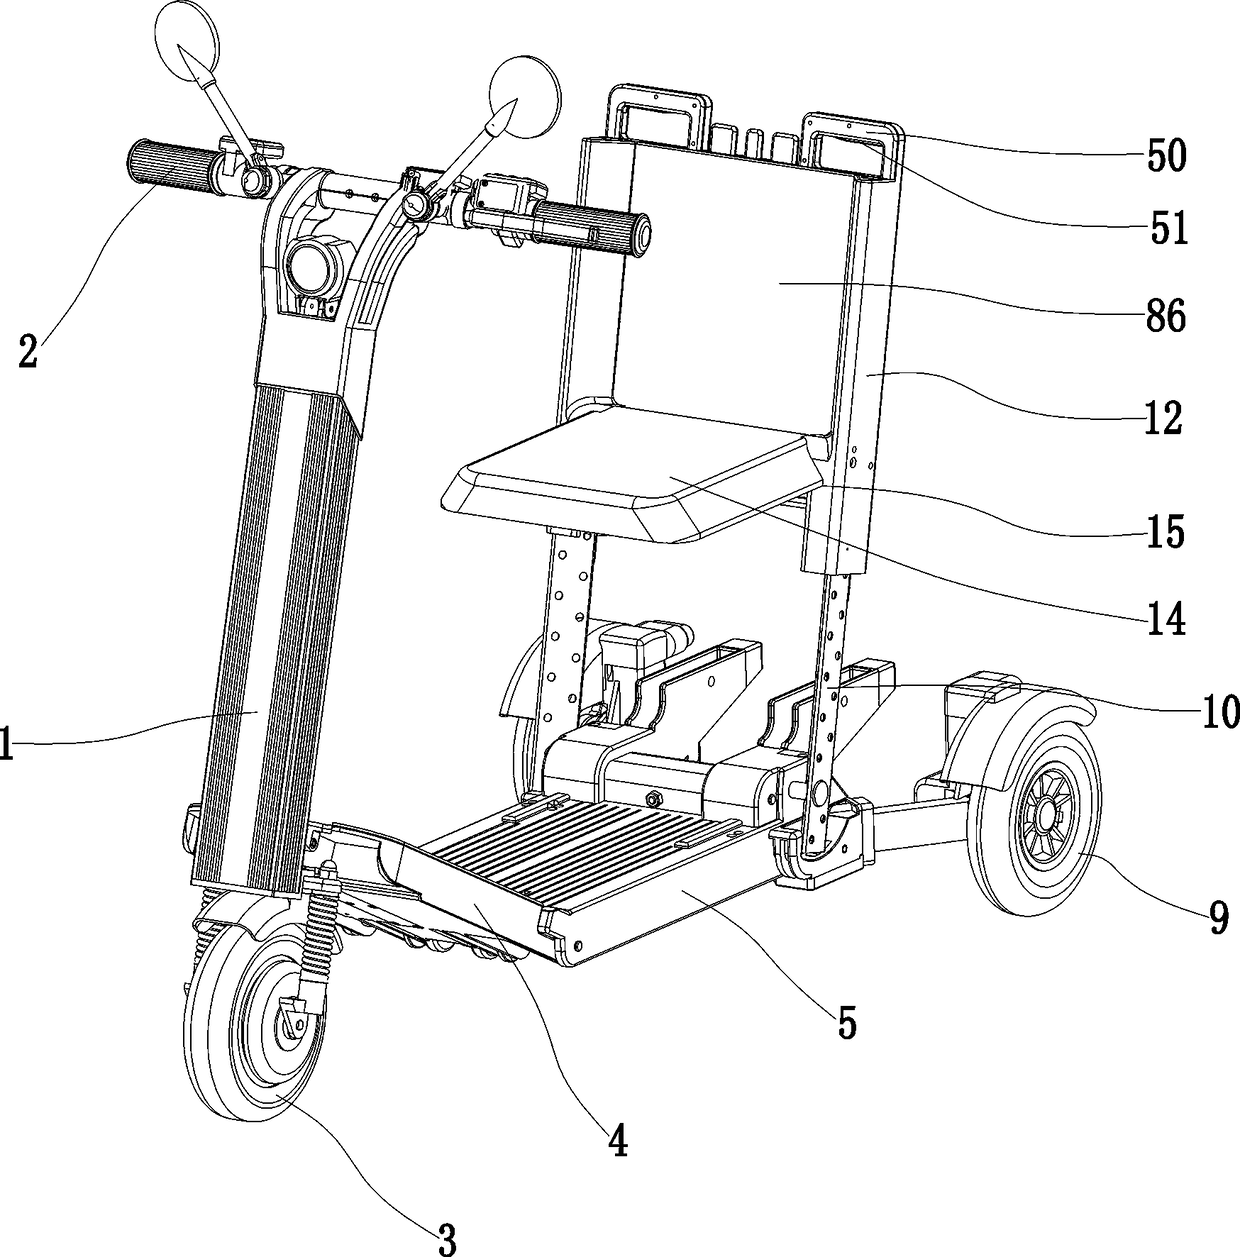 A foldable portable electric tricycle